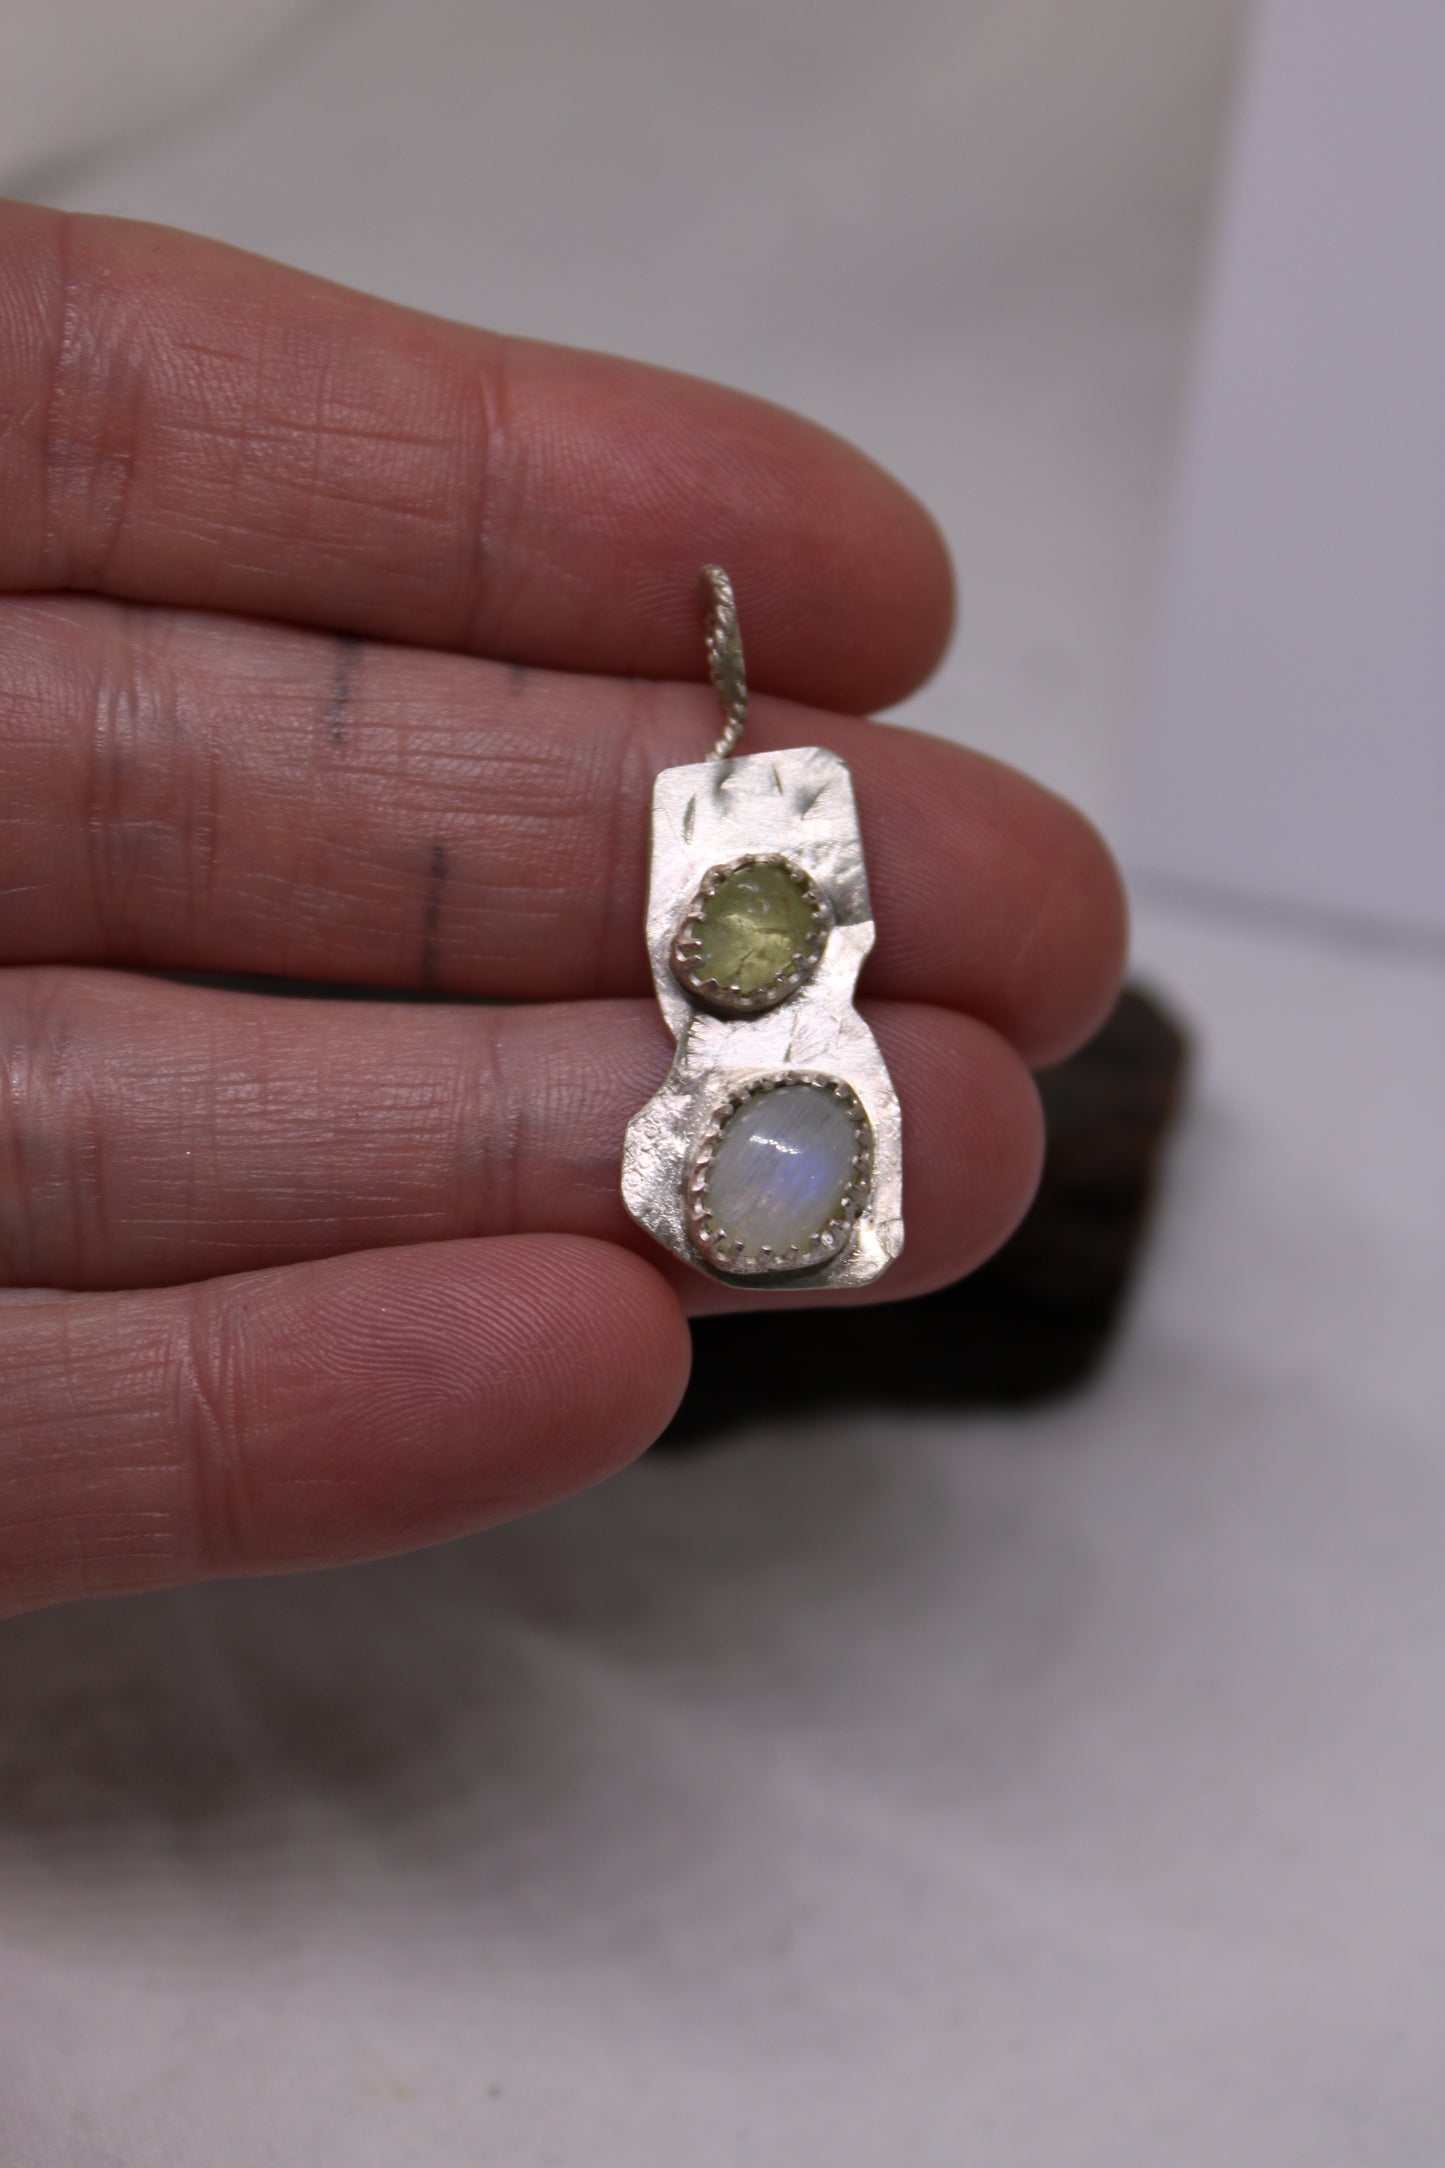 Green Apatite and Rainbow Moonstone Sterling Silver Pendant